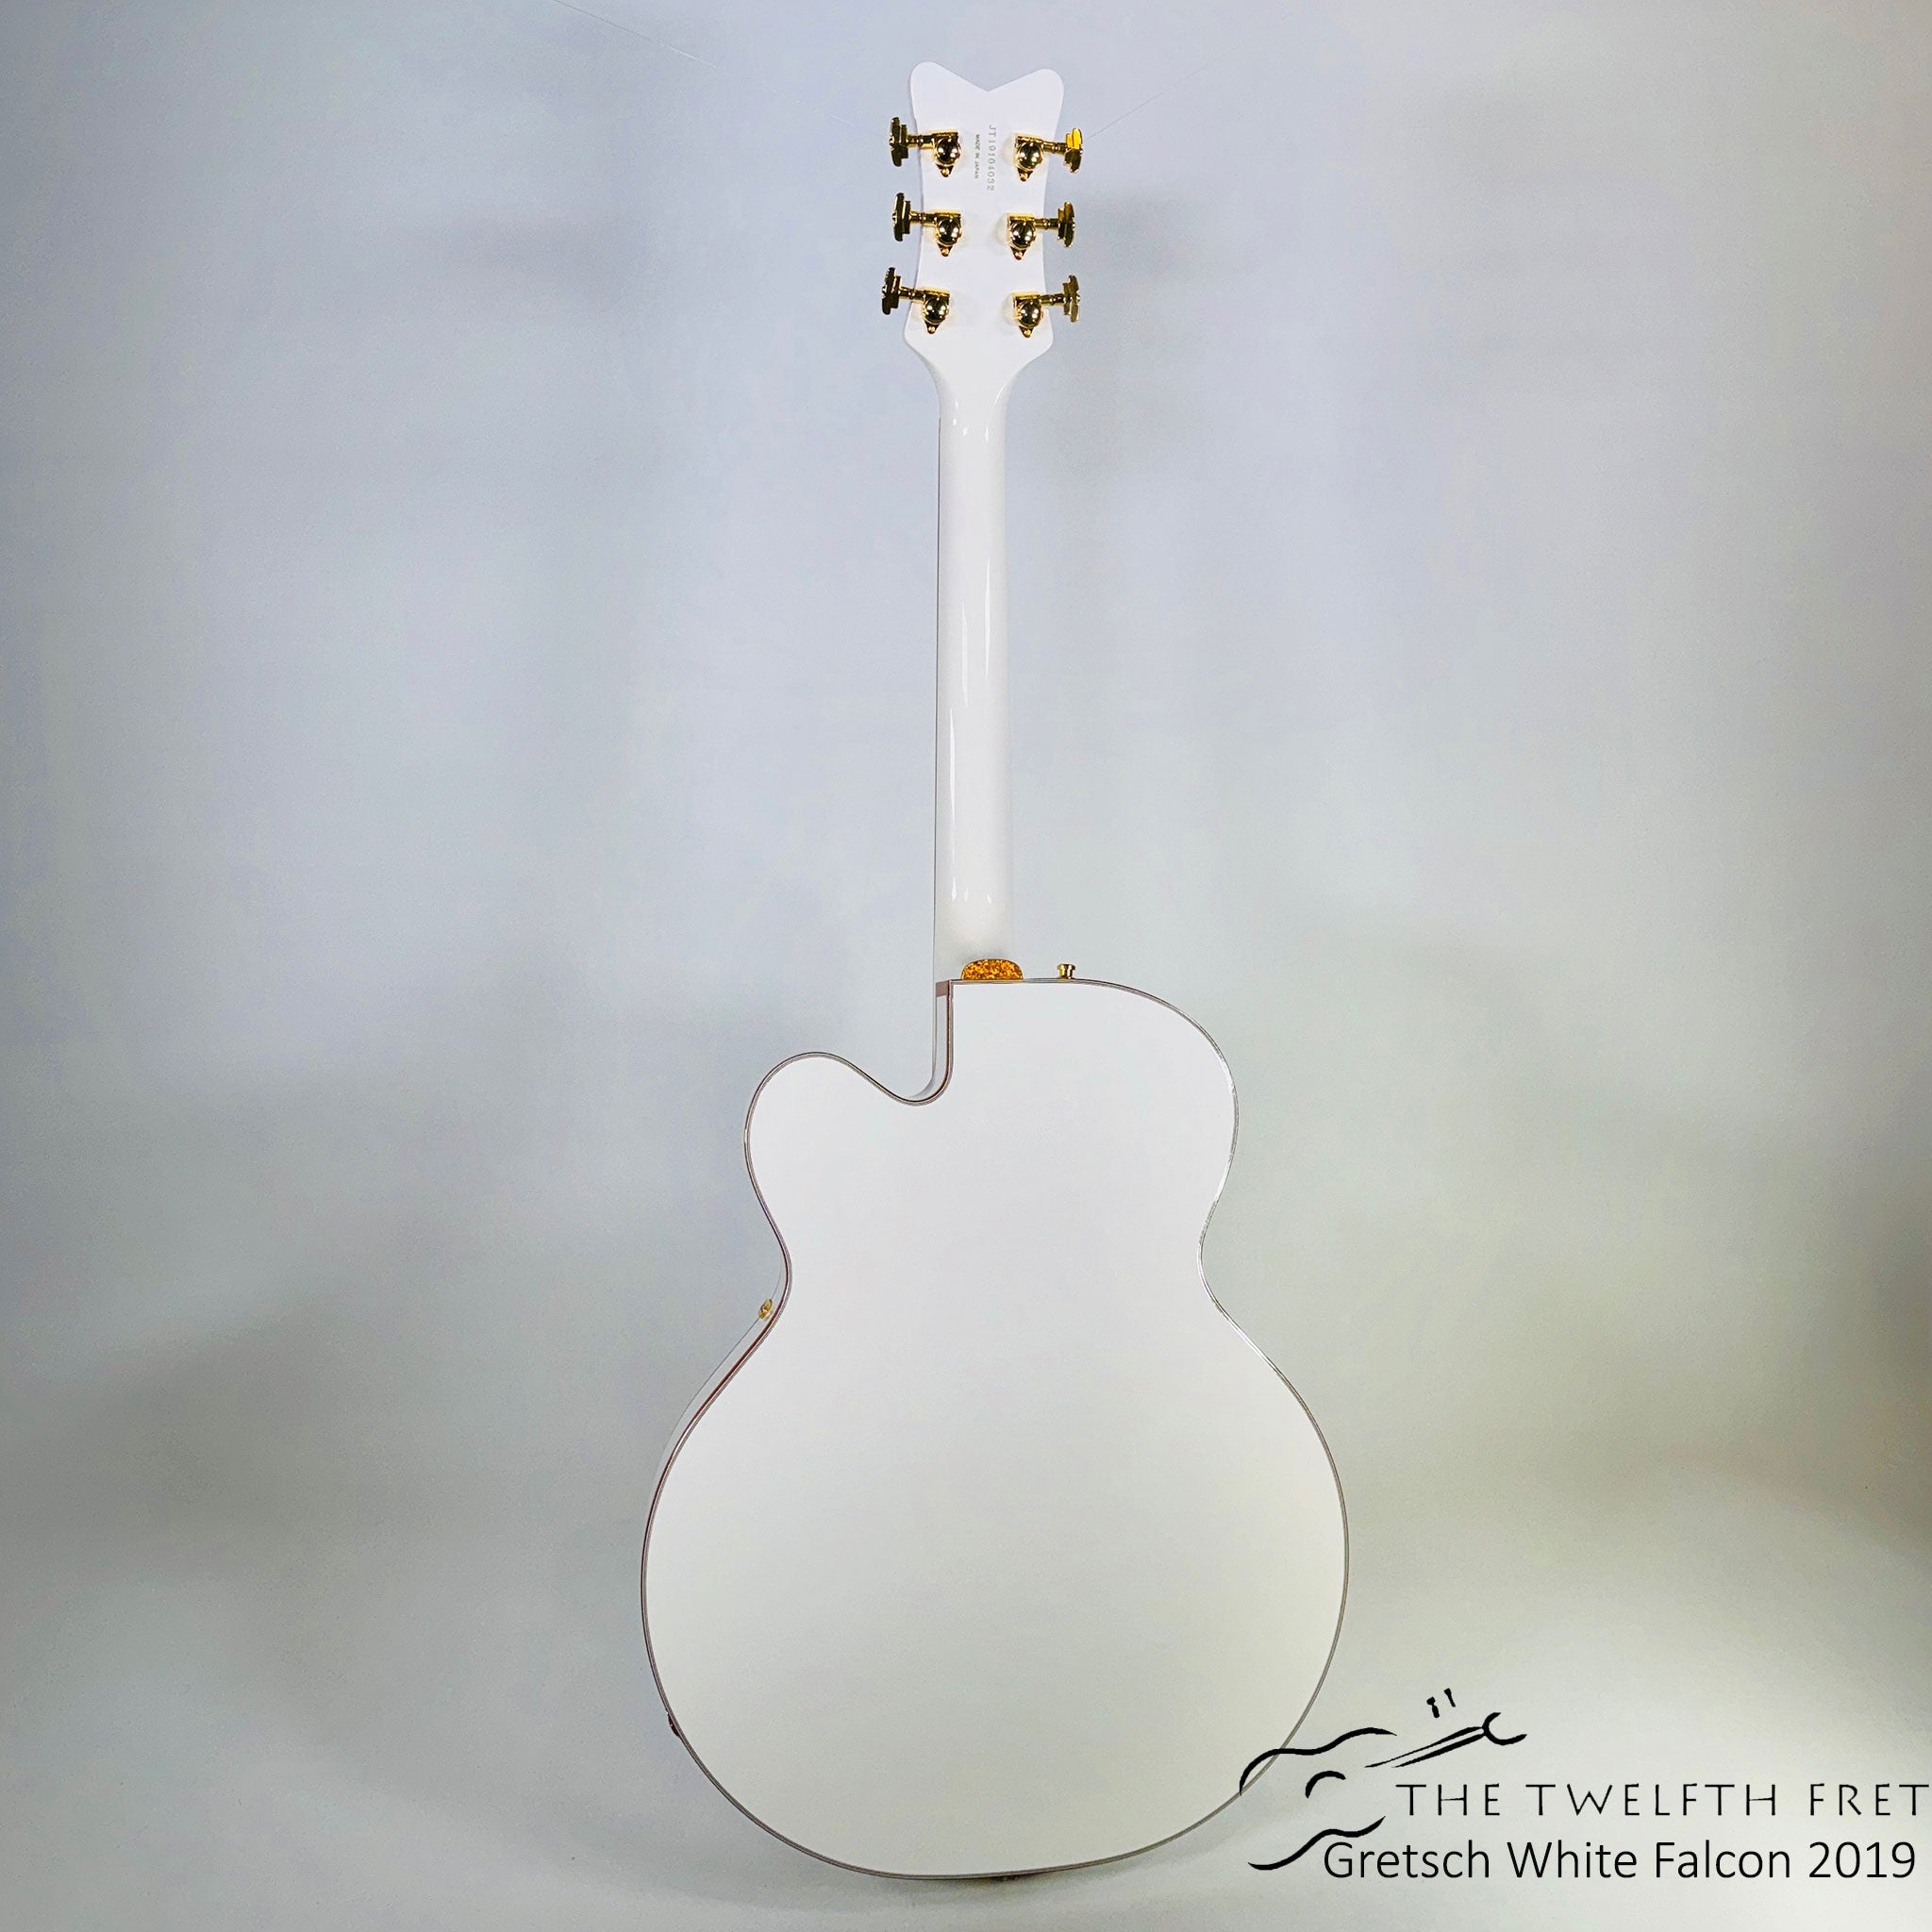 White Falcon G6136T-WHT, 2019 Hollow body  [USED] - The Twelfth Fret